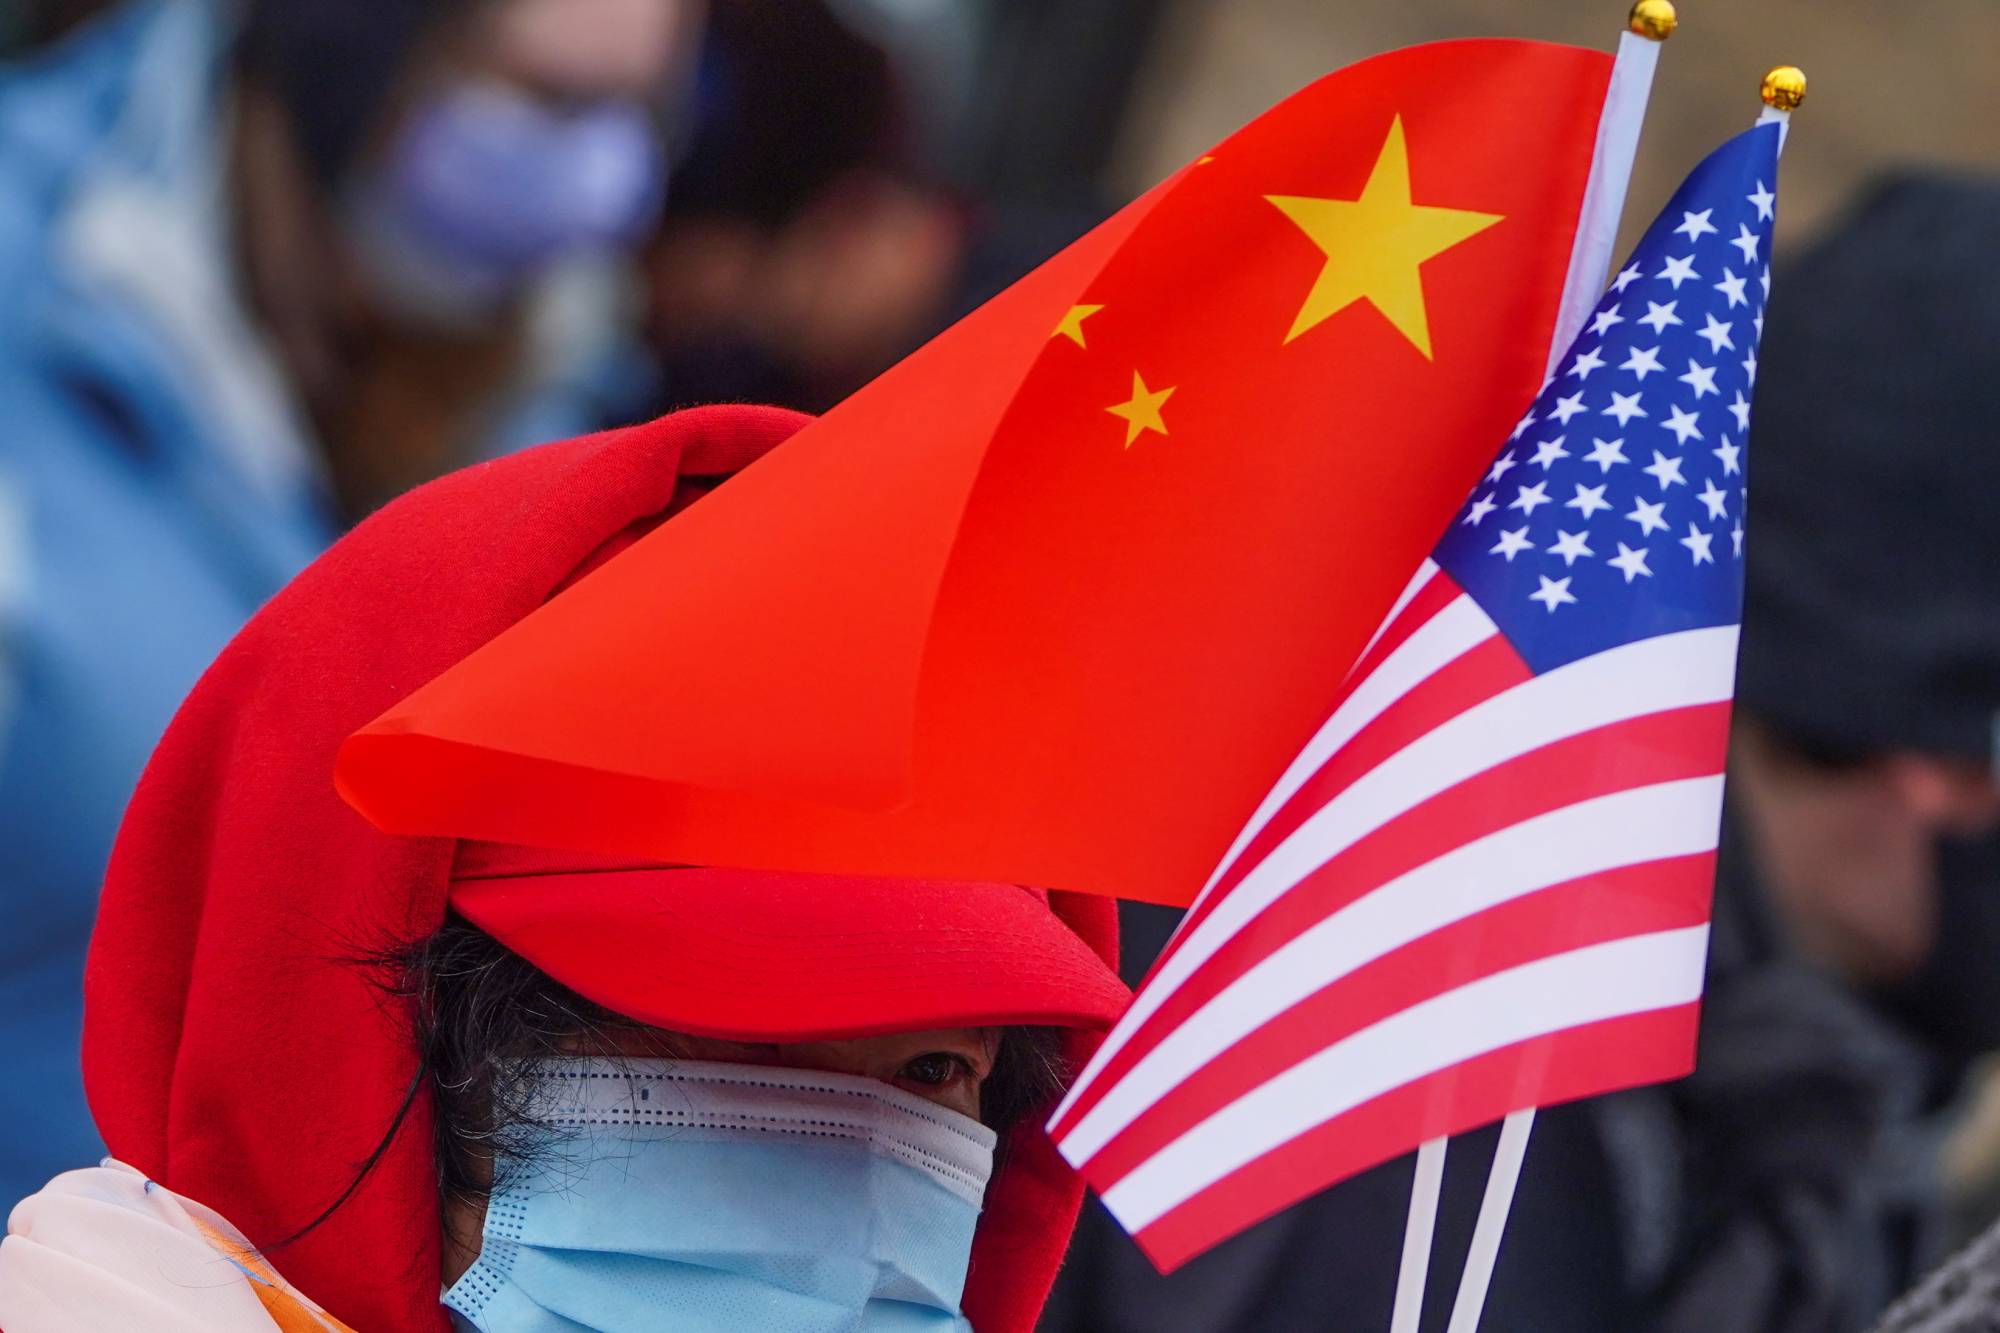 Nearly 9 in 10 U.S. adults see China as a 'competitor' or 'enemy' rather than a 'partner,' a new survey has found, shedding light on shifting American views of the Asian behemoth. | REUTERS